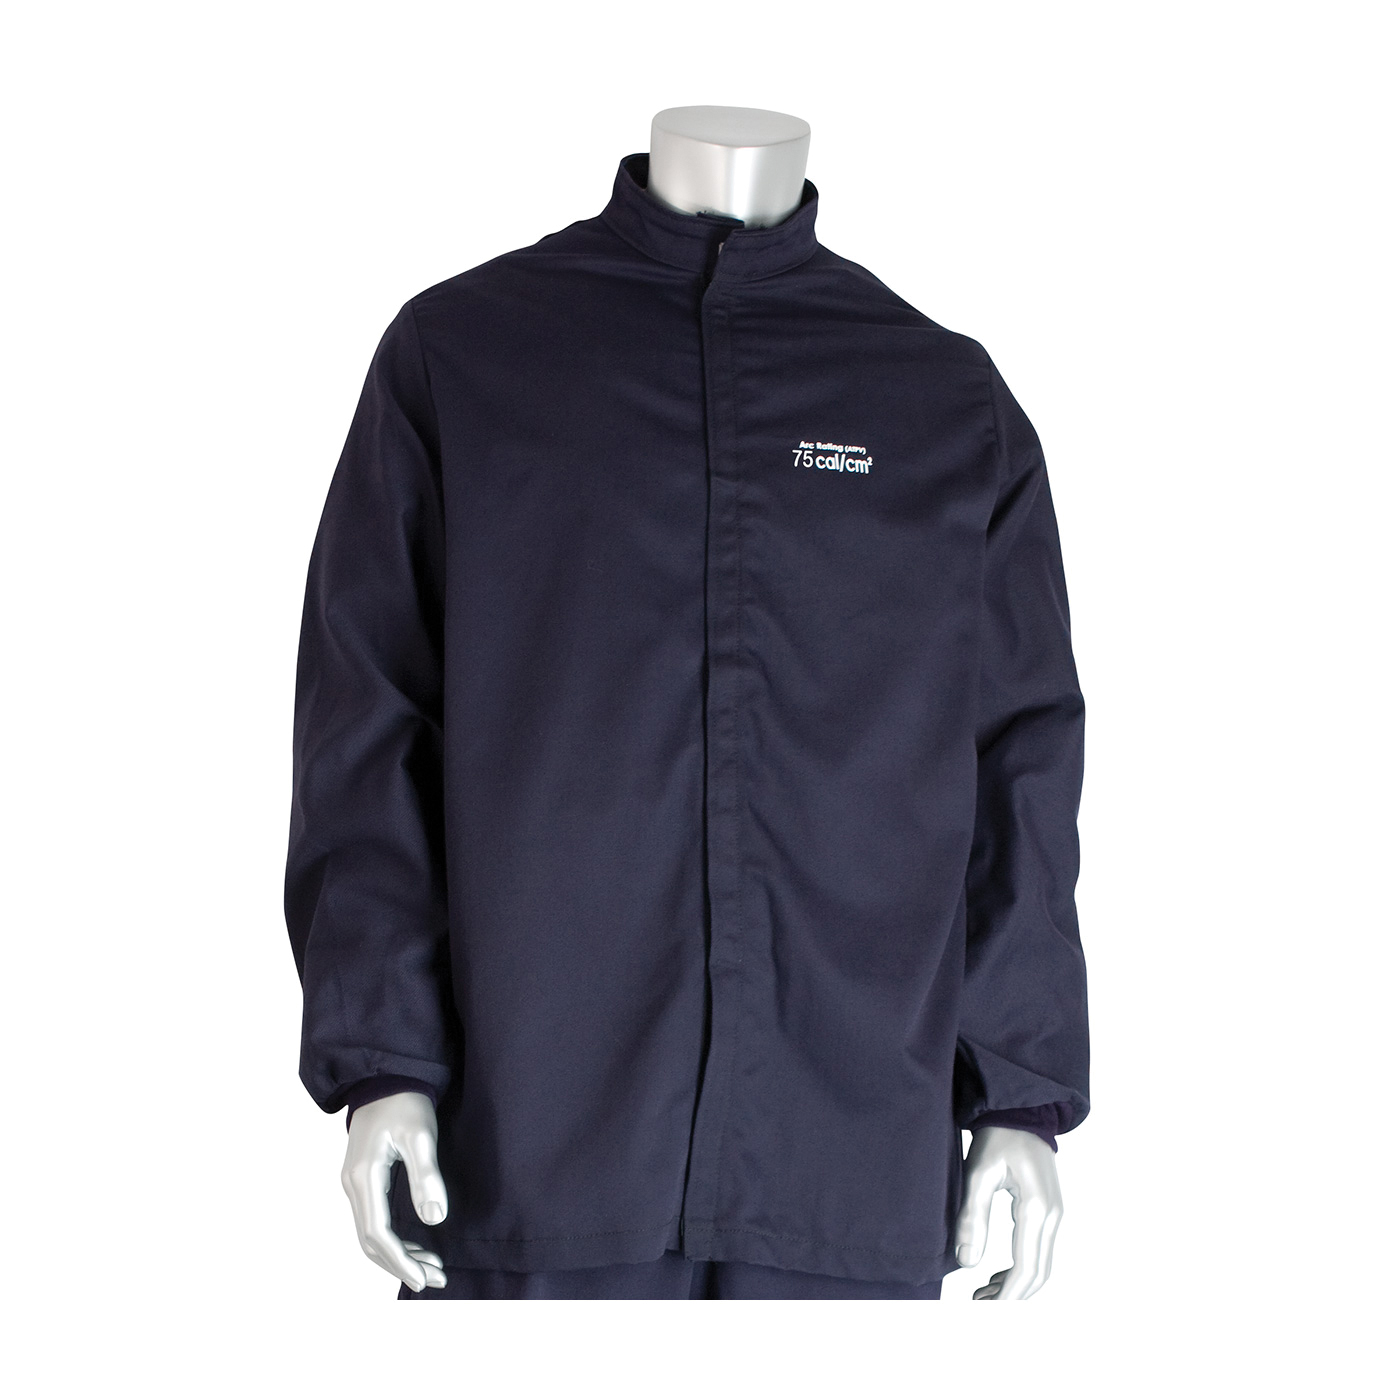 PIP® 9100-75000/5X Arc and Flame Resistant Jacket, 5XL, Navy, Westex® UltraSoft® 88% Cotton 12% High Tenacity Nylon, 64 to 66 in Chest, Resists: Arc and Flame, ASTM F1506-10a, ASTM F2178-12